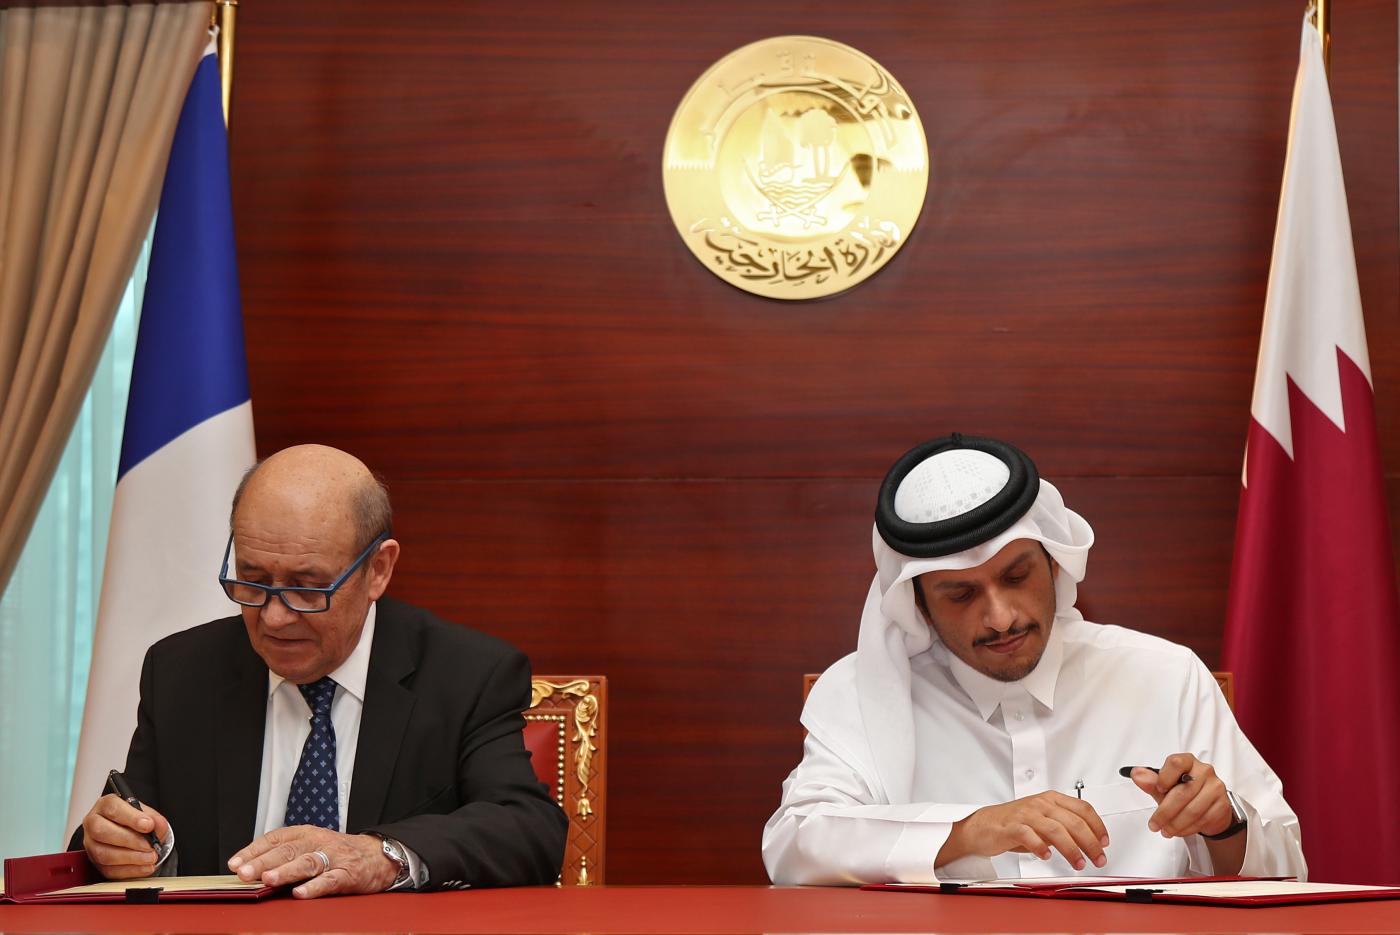 Qatar and France sign deal for greater economic, energy and security cooperation